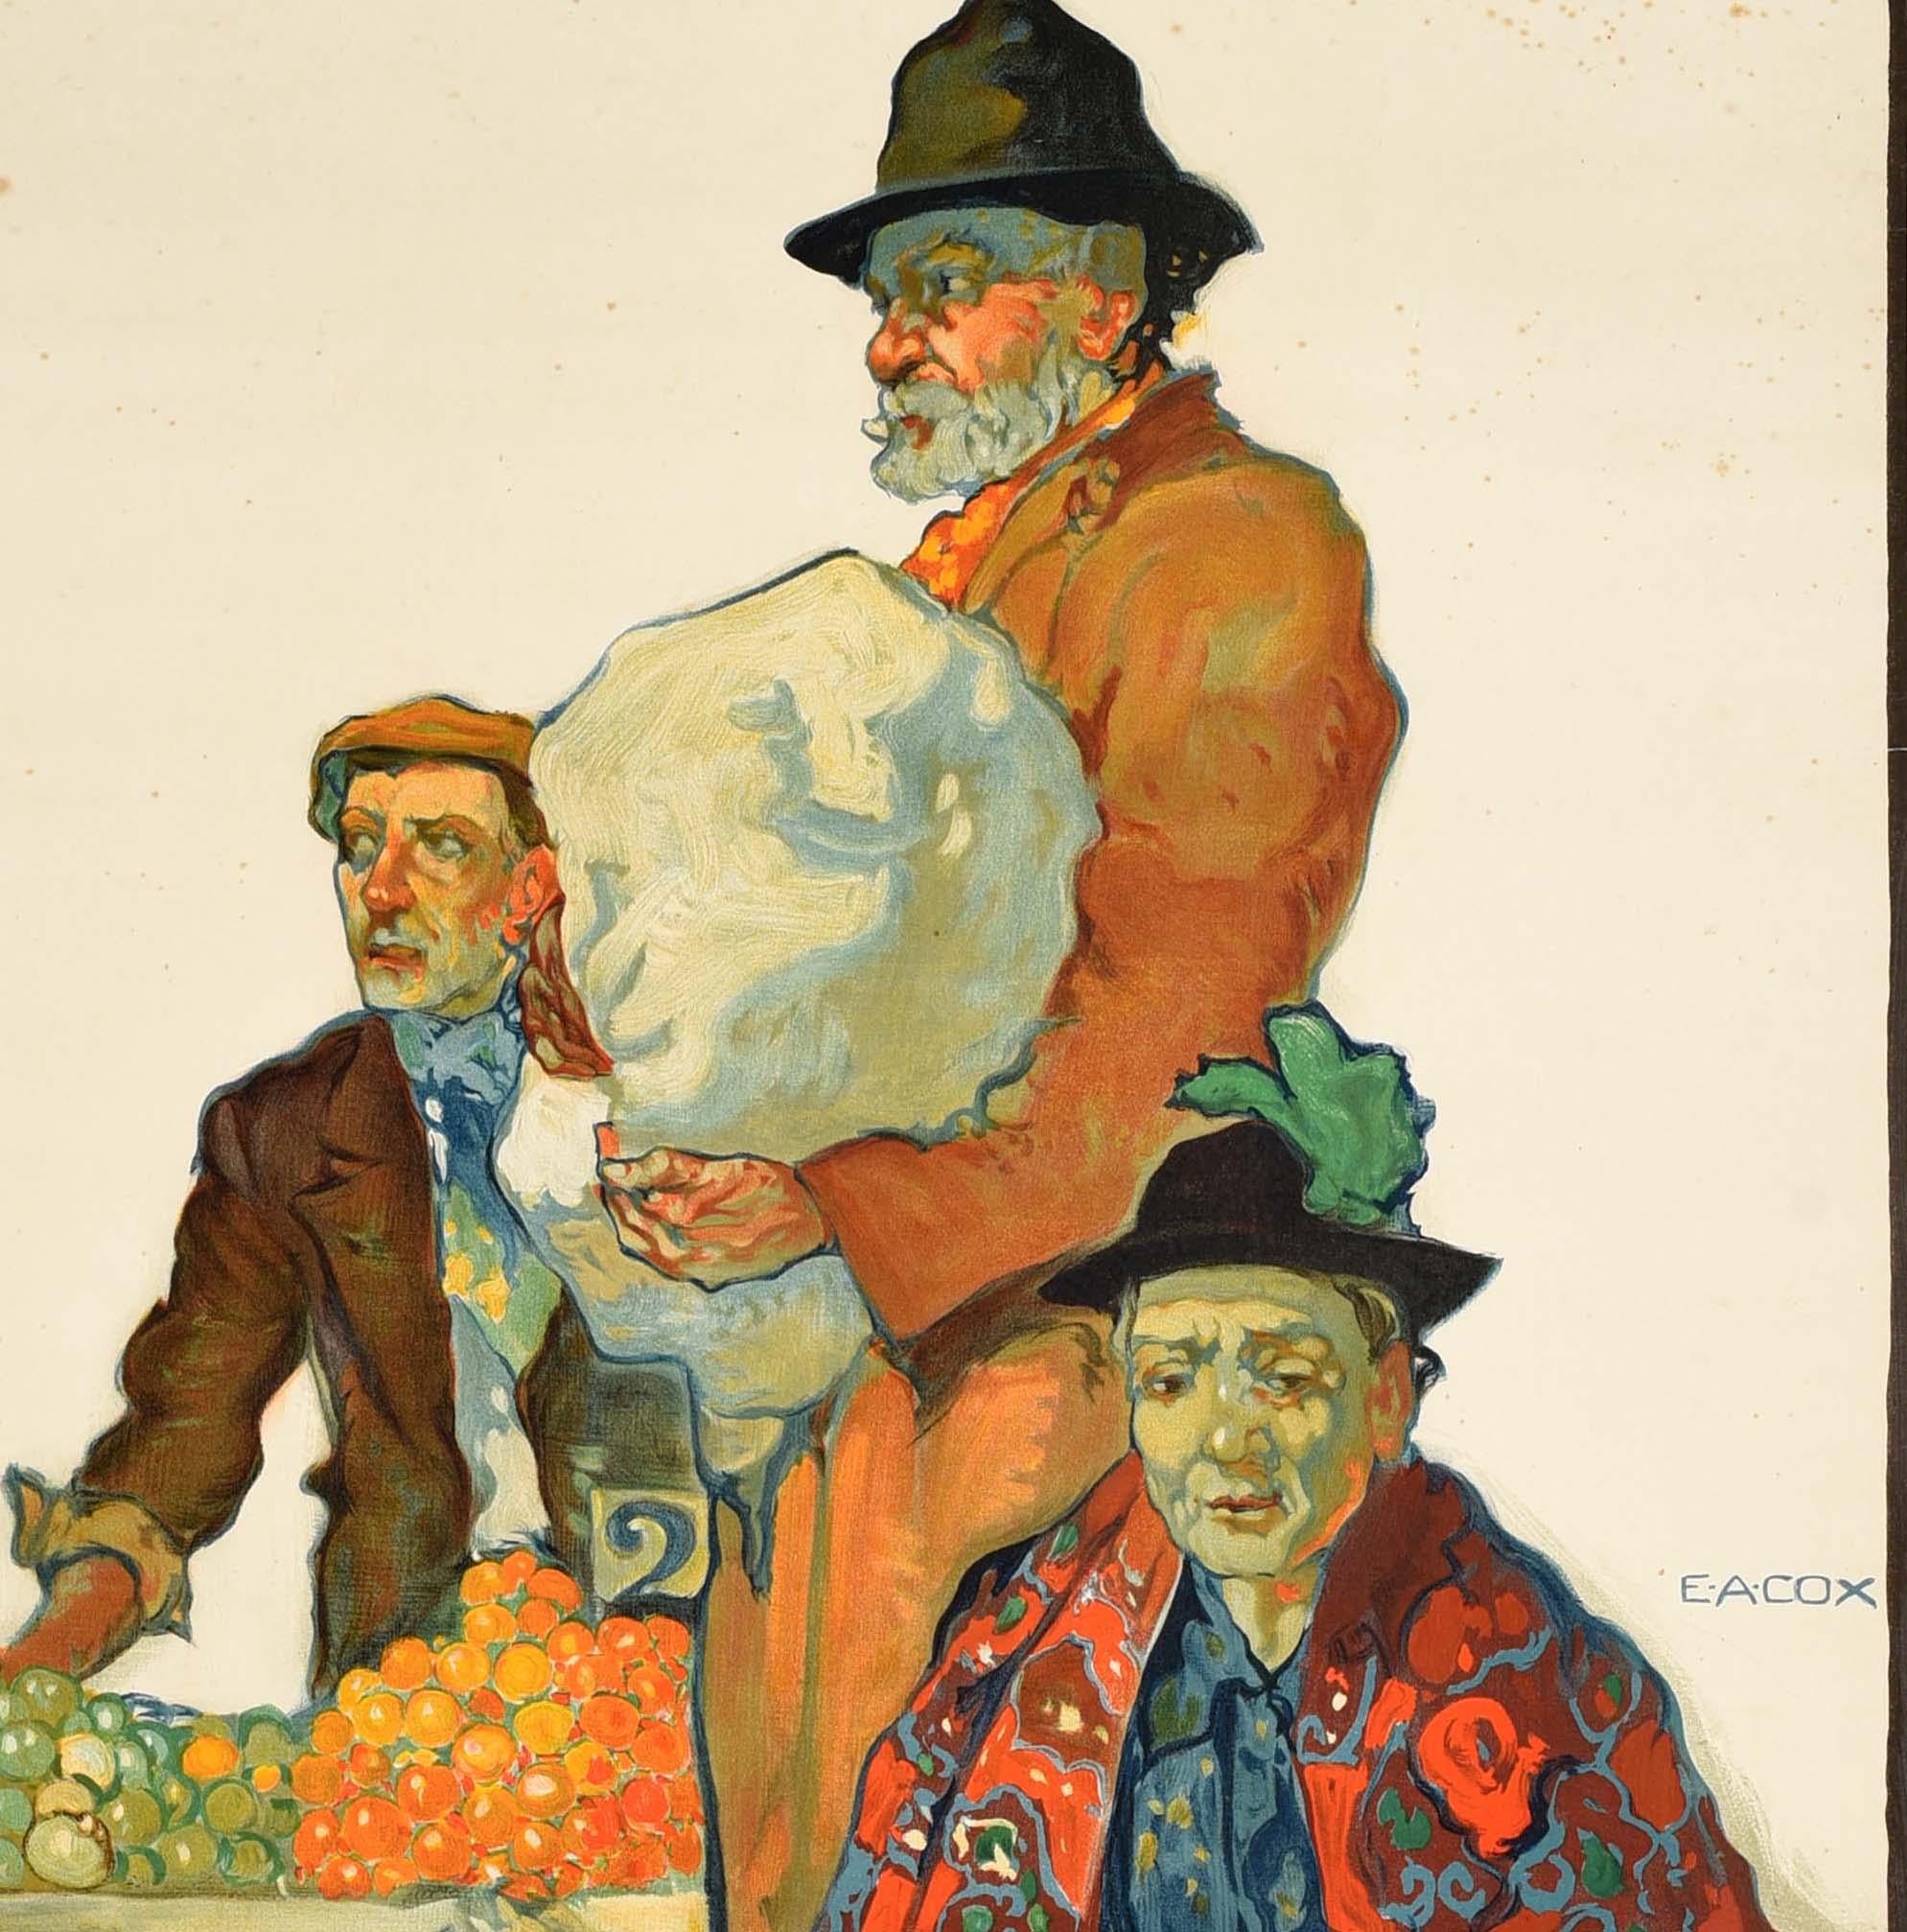 Original antique travel poster for Watford featuring a great illustration of market sellers by the British painter and graphic artist Elijah Albert Cox (1876-1955) depicting a man standing between a greengrocer behind his fruit stand and a flower